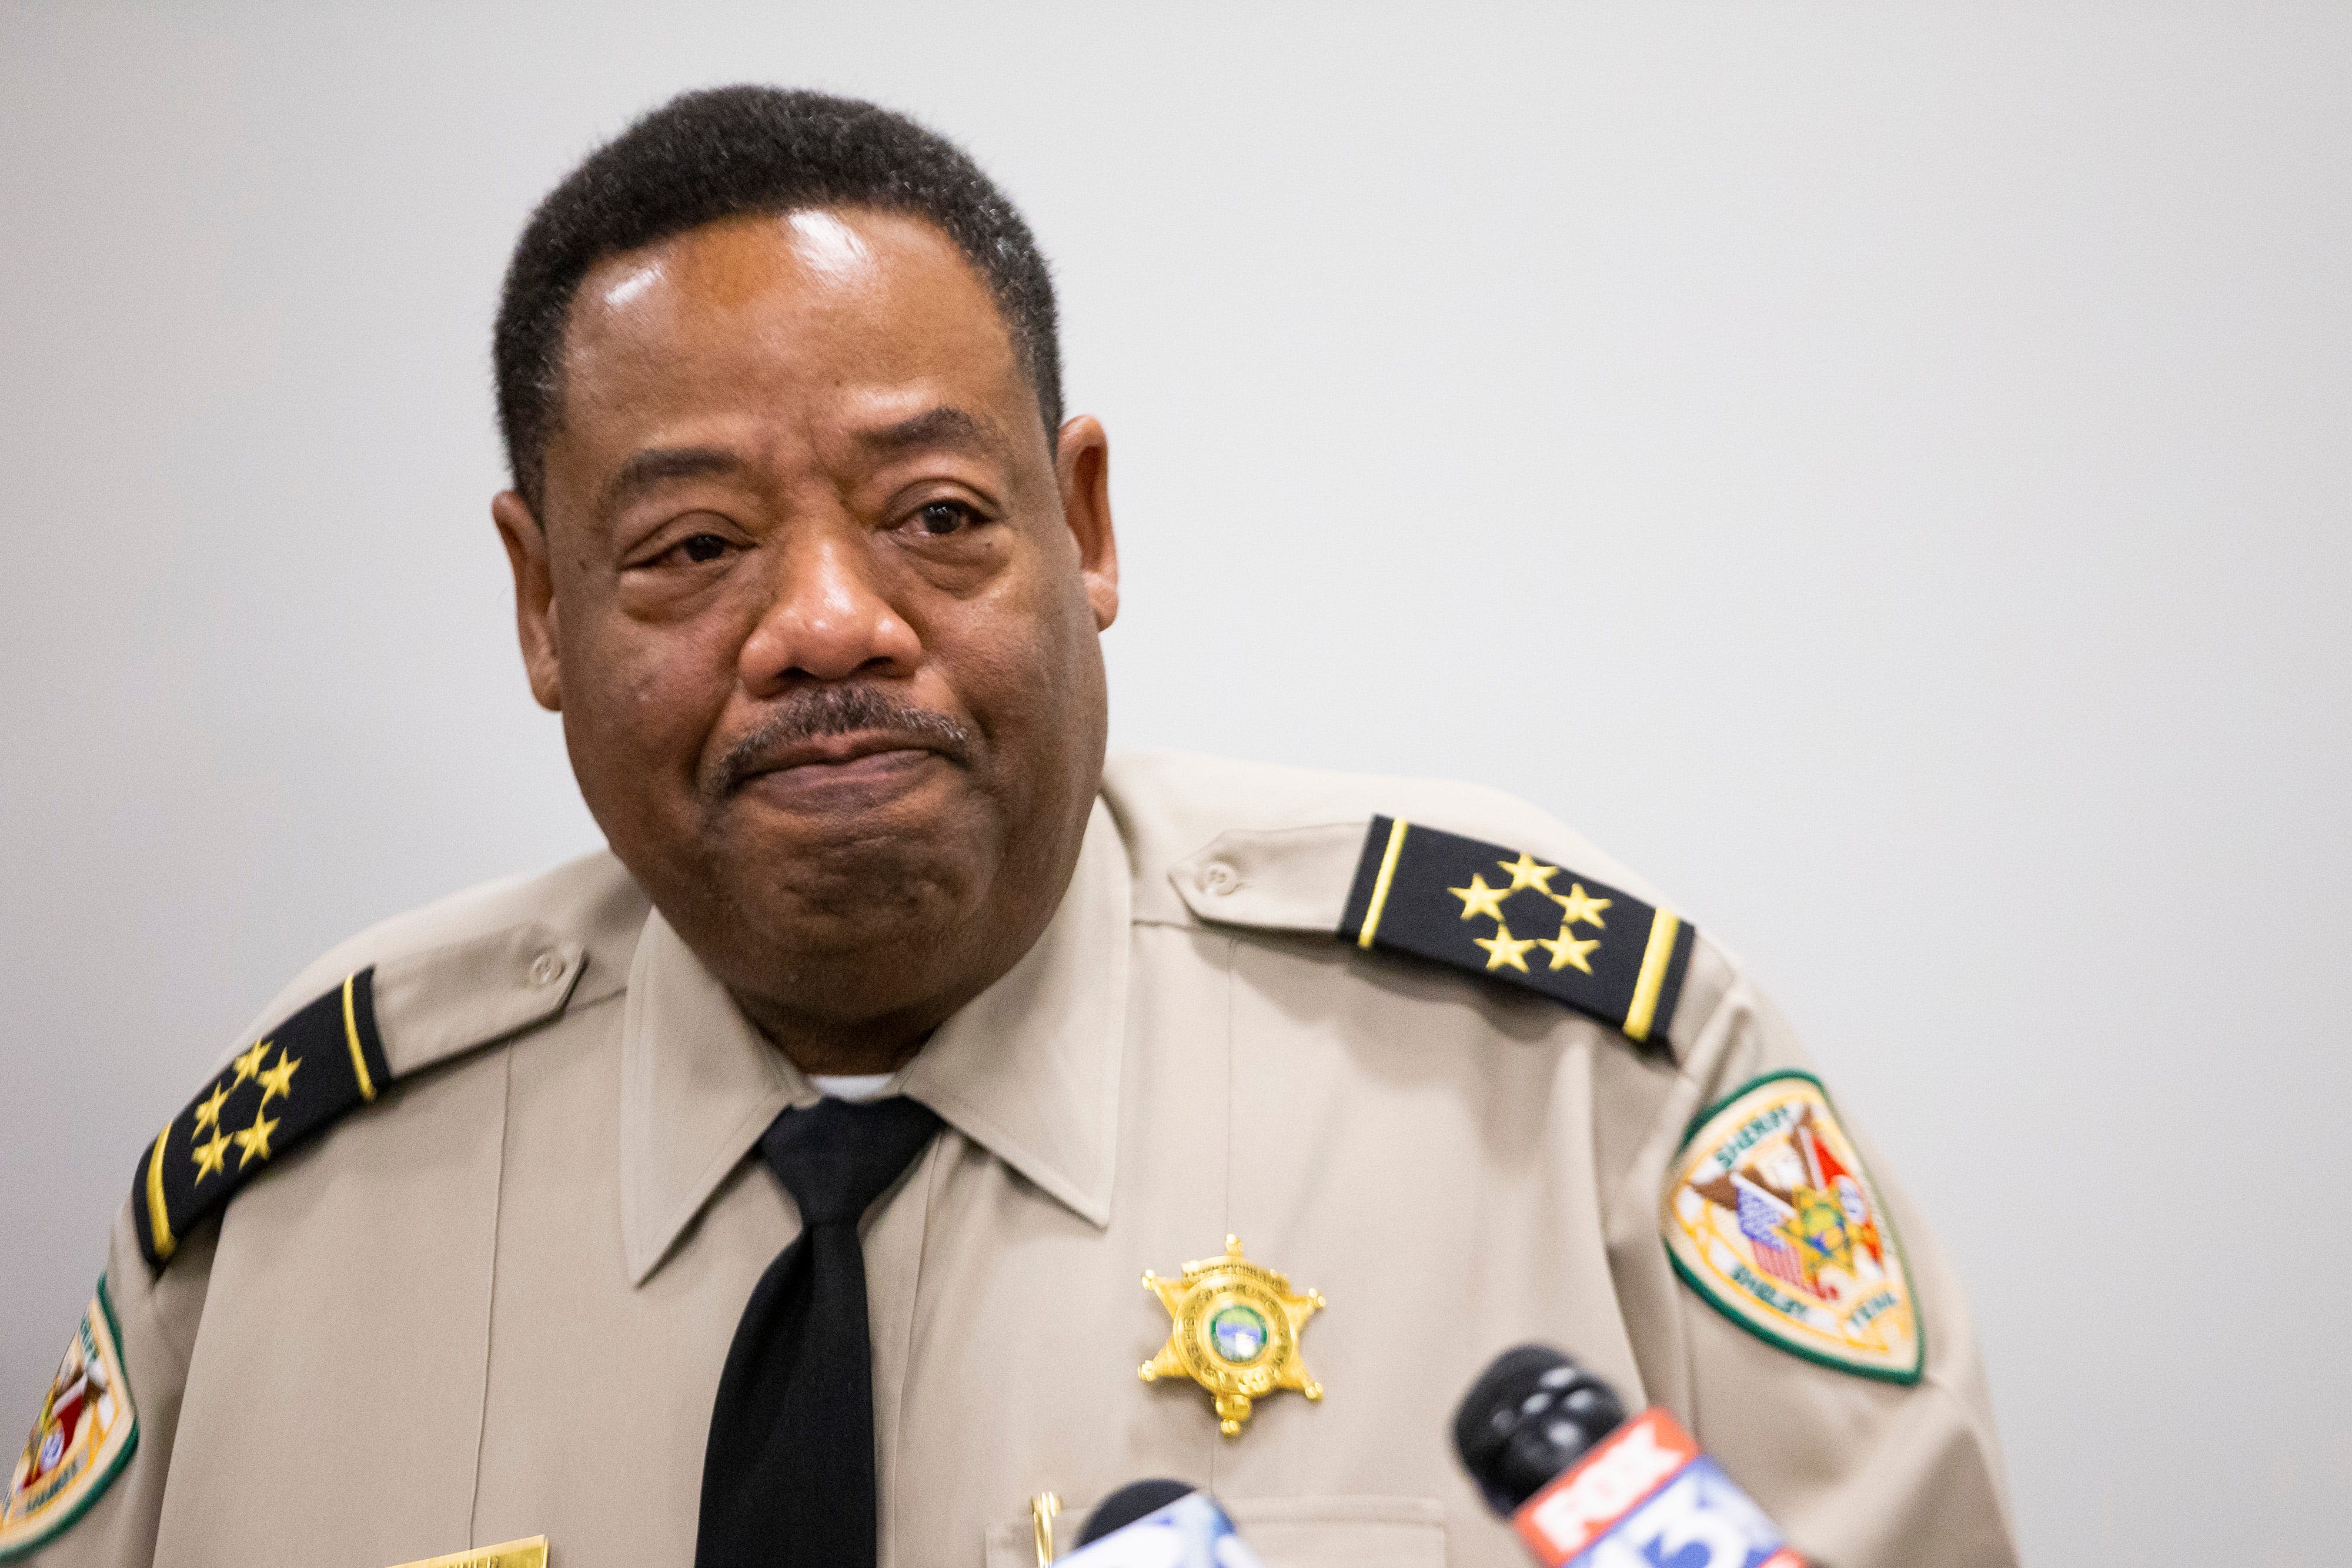 Sheriff Bonner threatens lawsuit over proposed county budget cuts | The Week in Politics